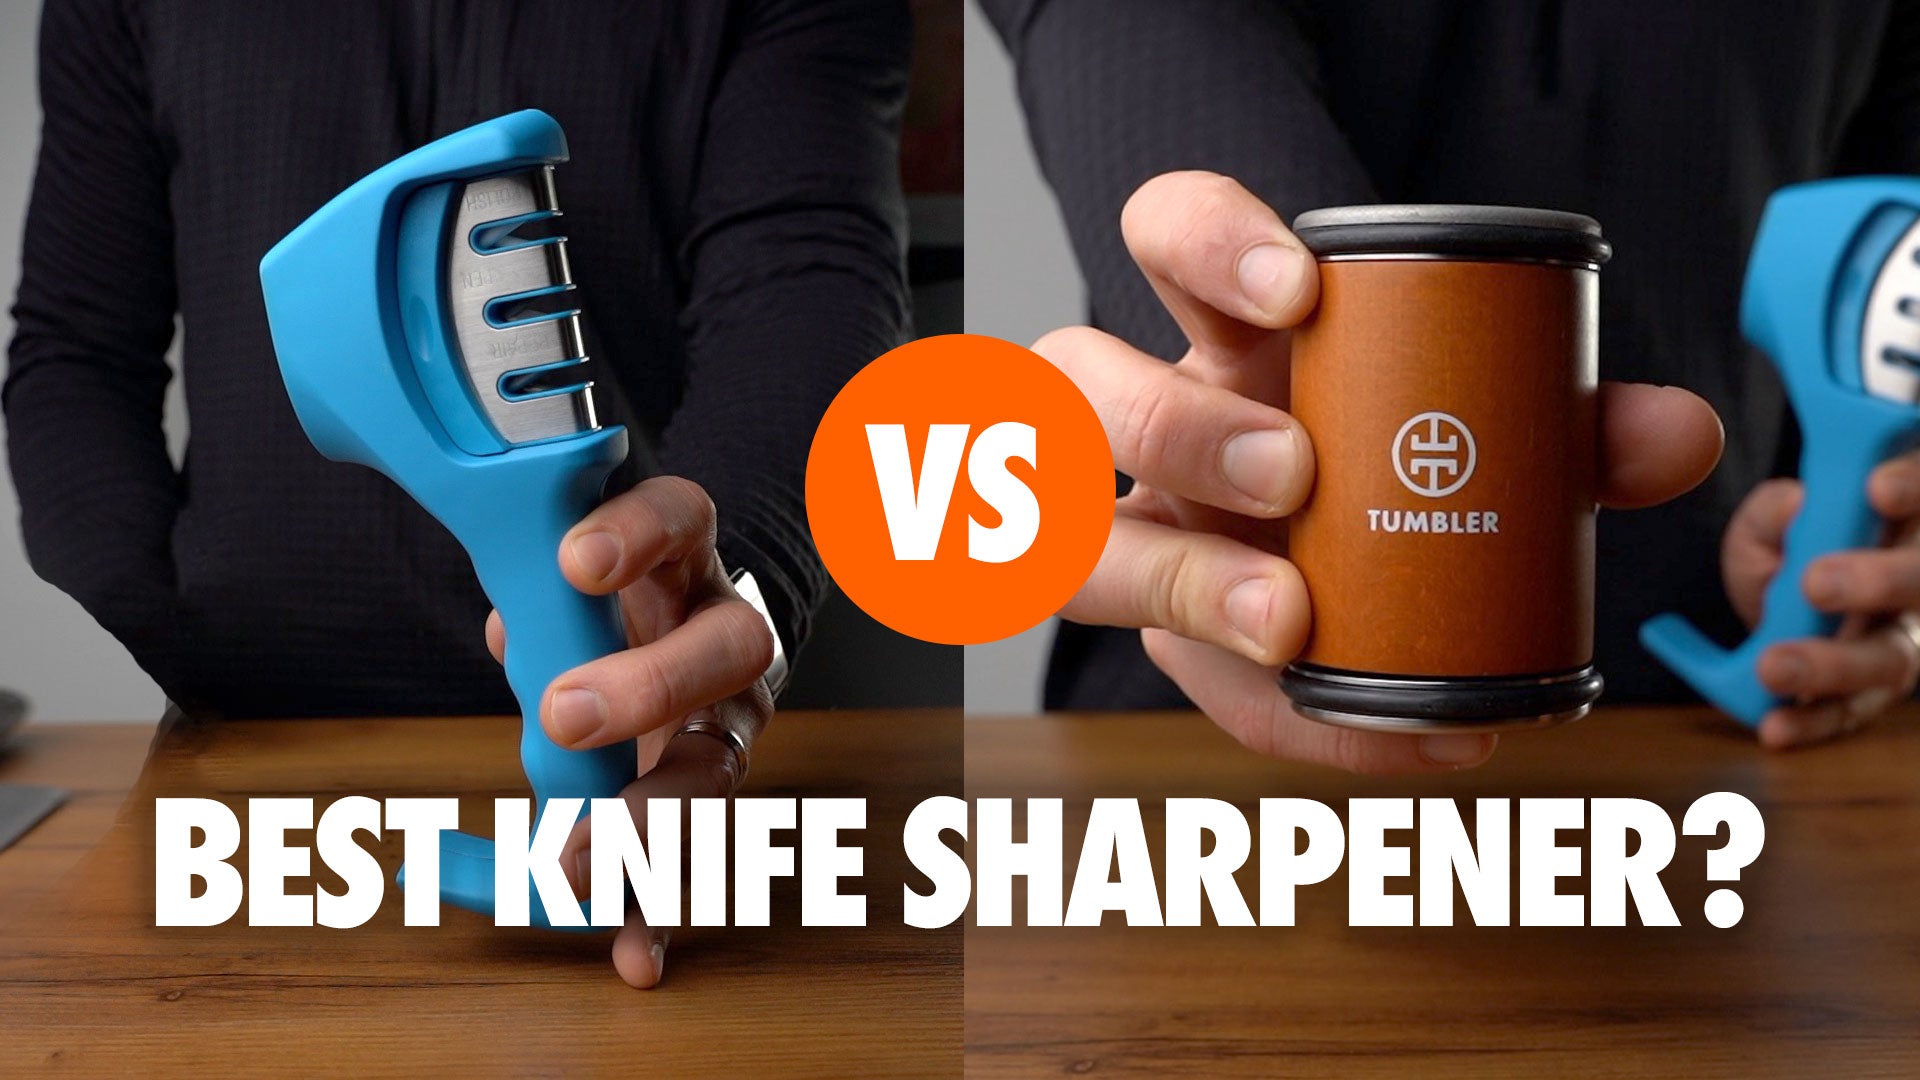 Tumbler Rolling Sharpener vs Gorilla Grip Pull Through Knife Sharpener: Which is the Best Choice for Home Chefs?